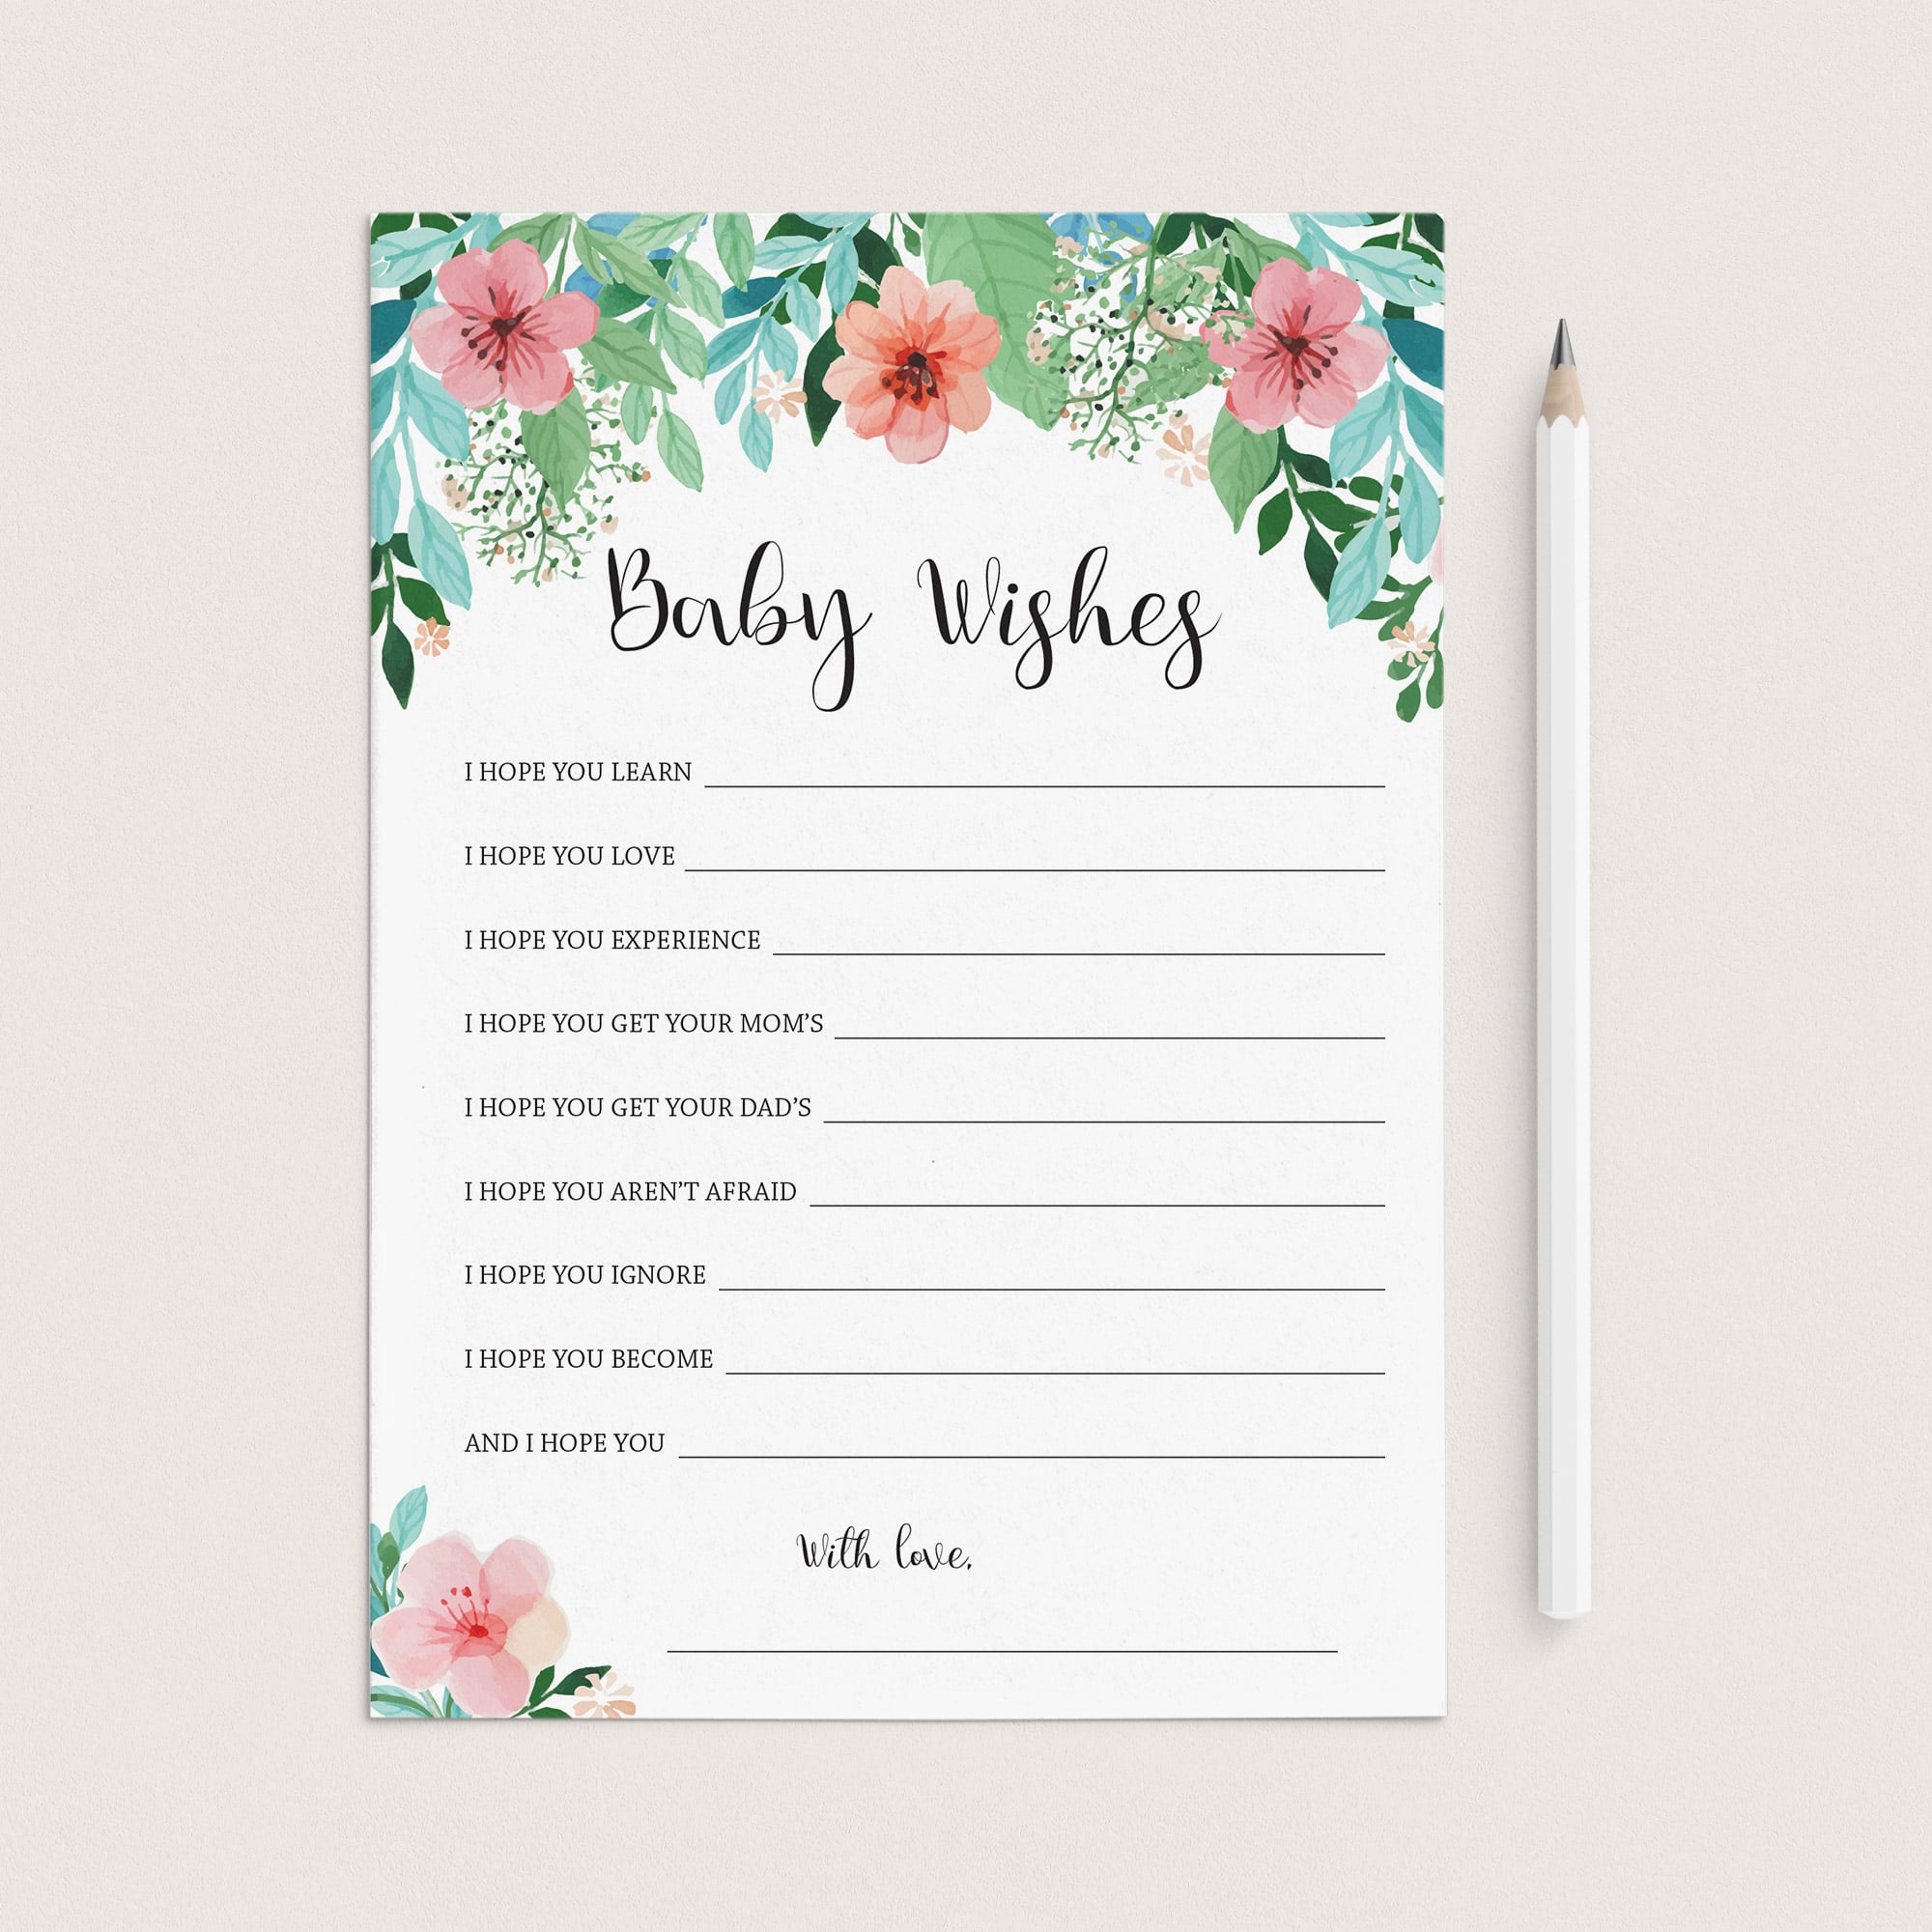 New baby girl wishes printable by LittleSizzle